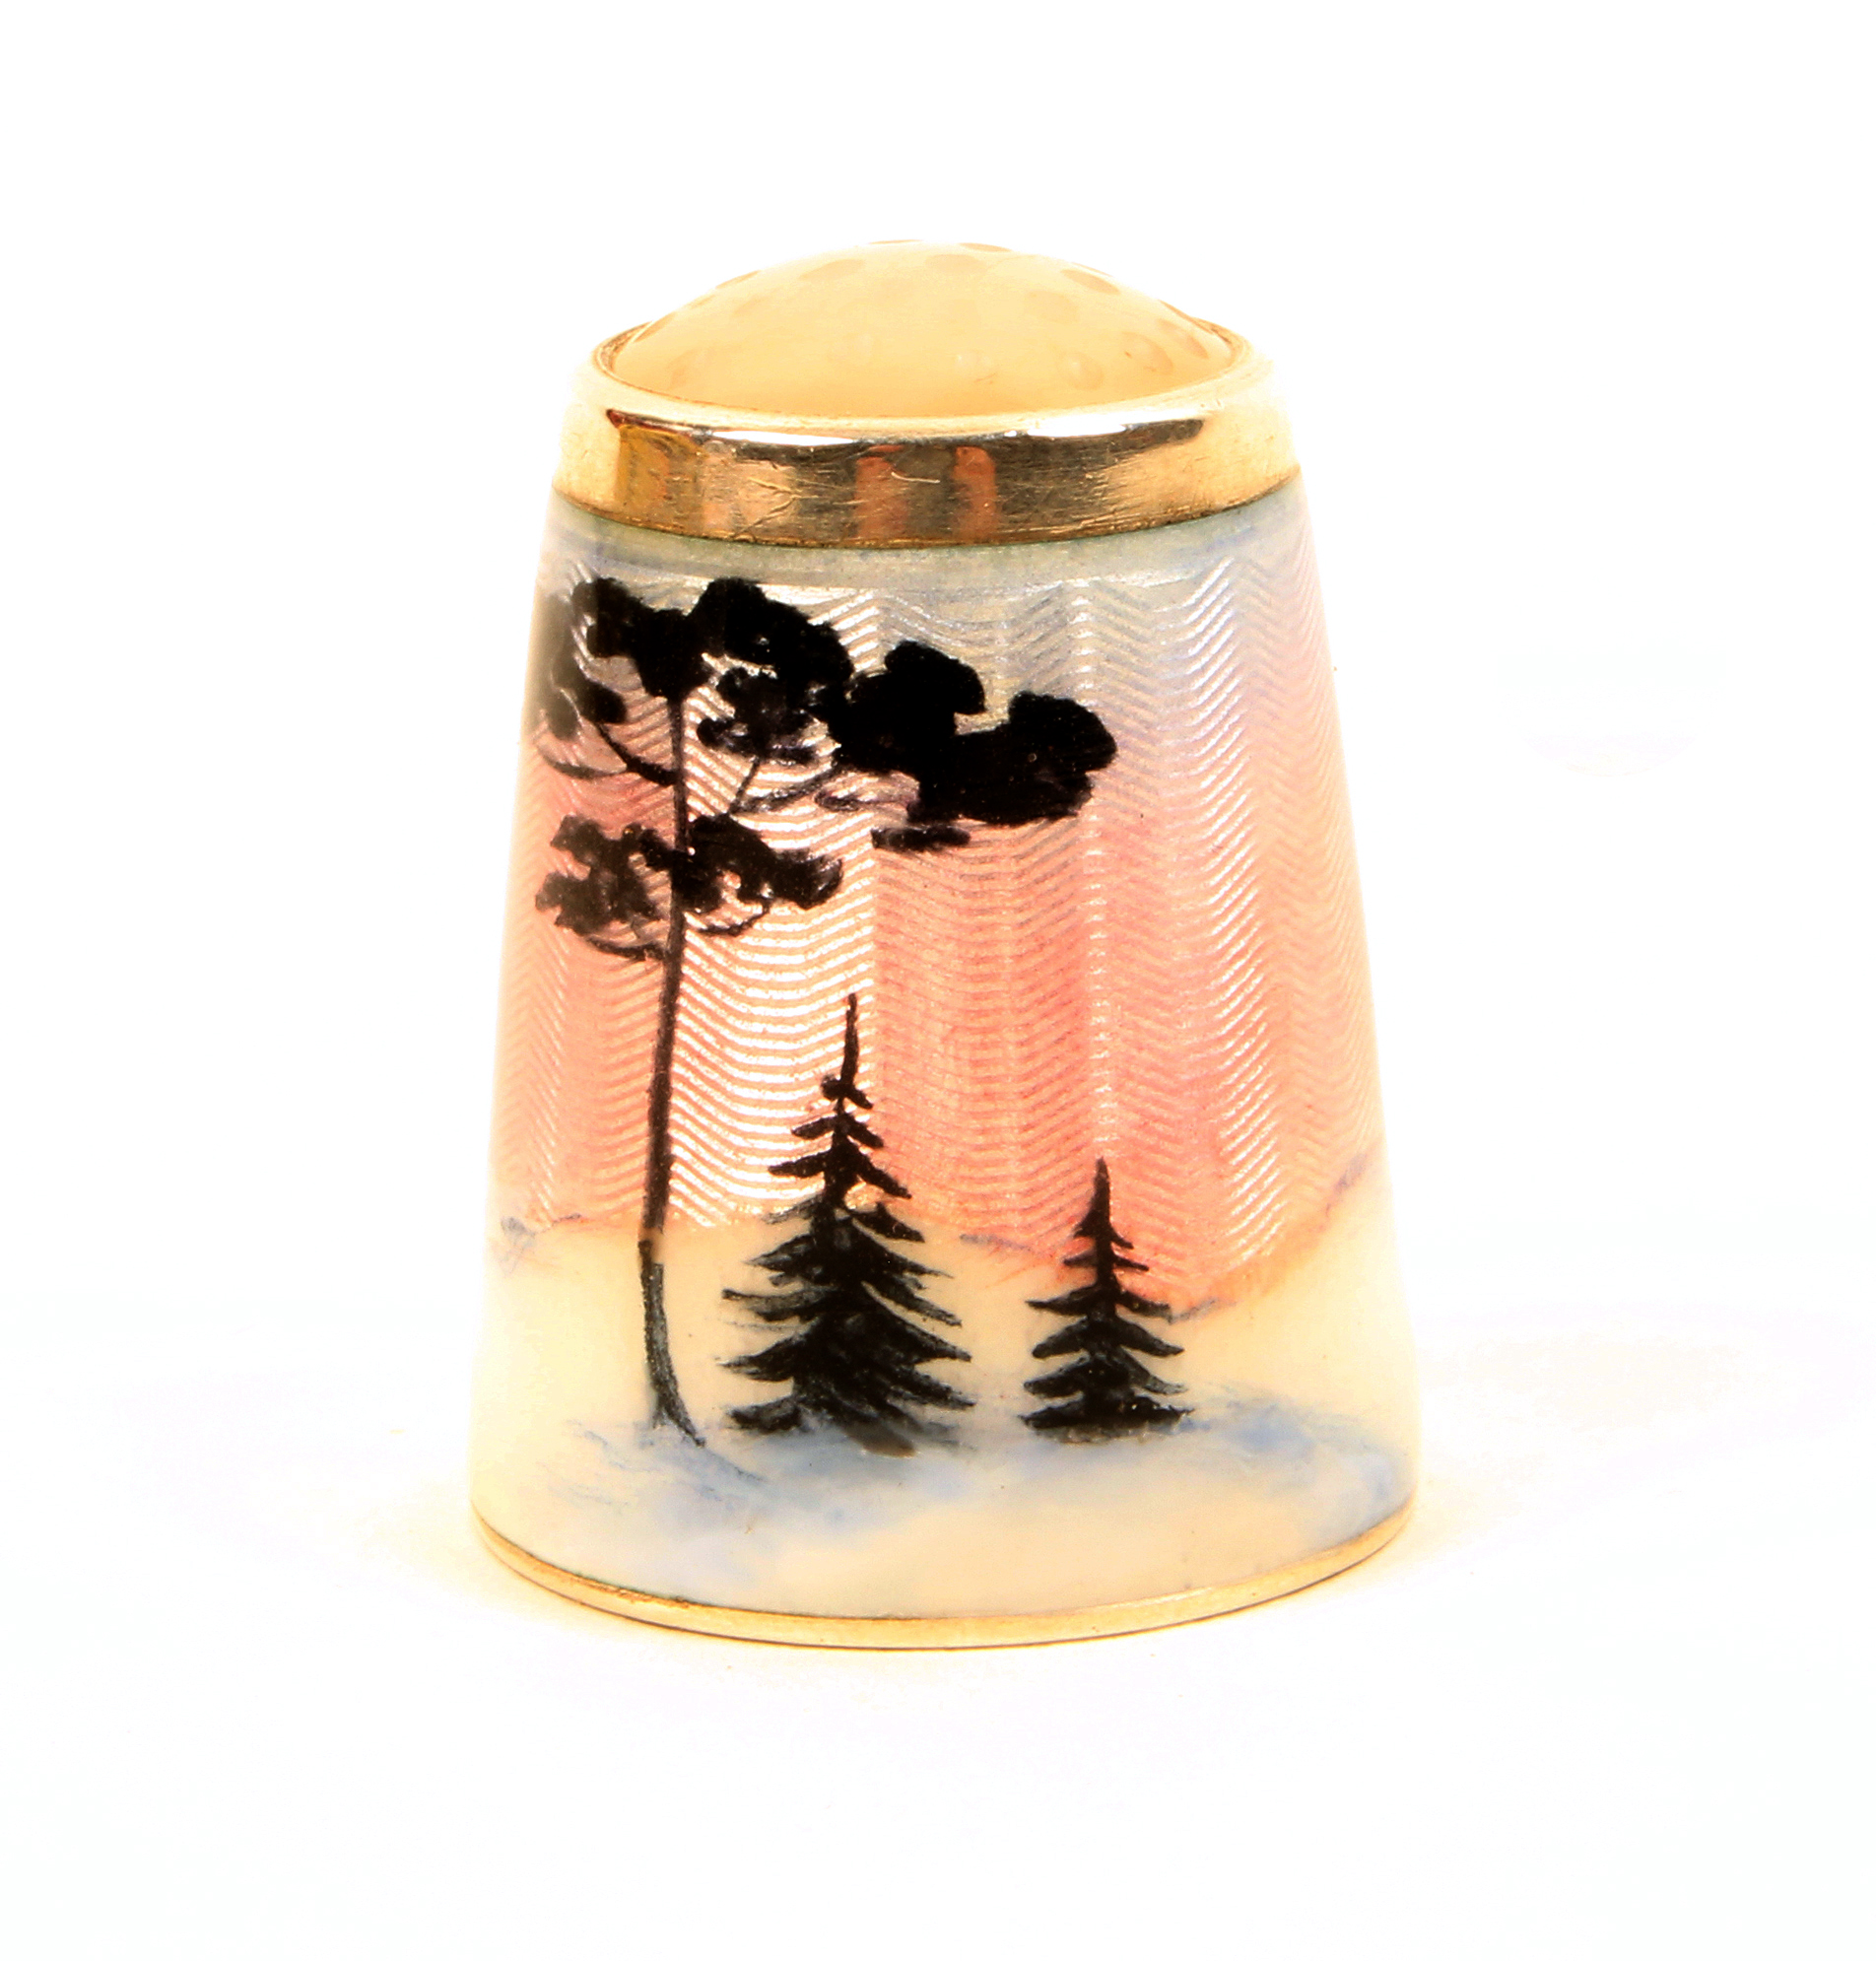 A Norwegian silver and enamel stone top thimble, by Aksel Holmsen, depicting a reindeer and trees in - Image 2 of 2